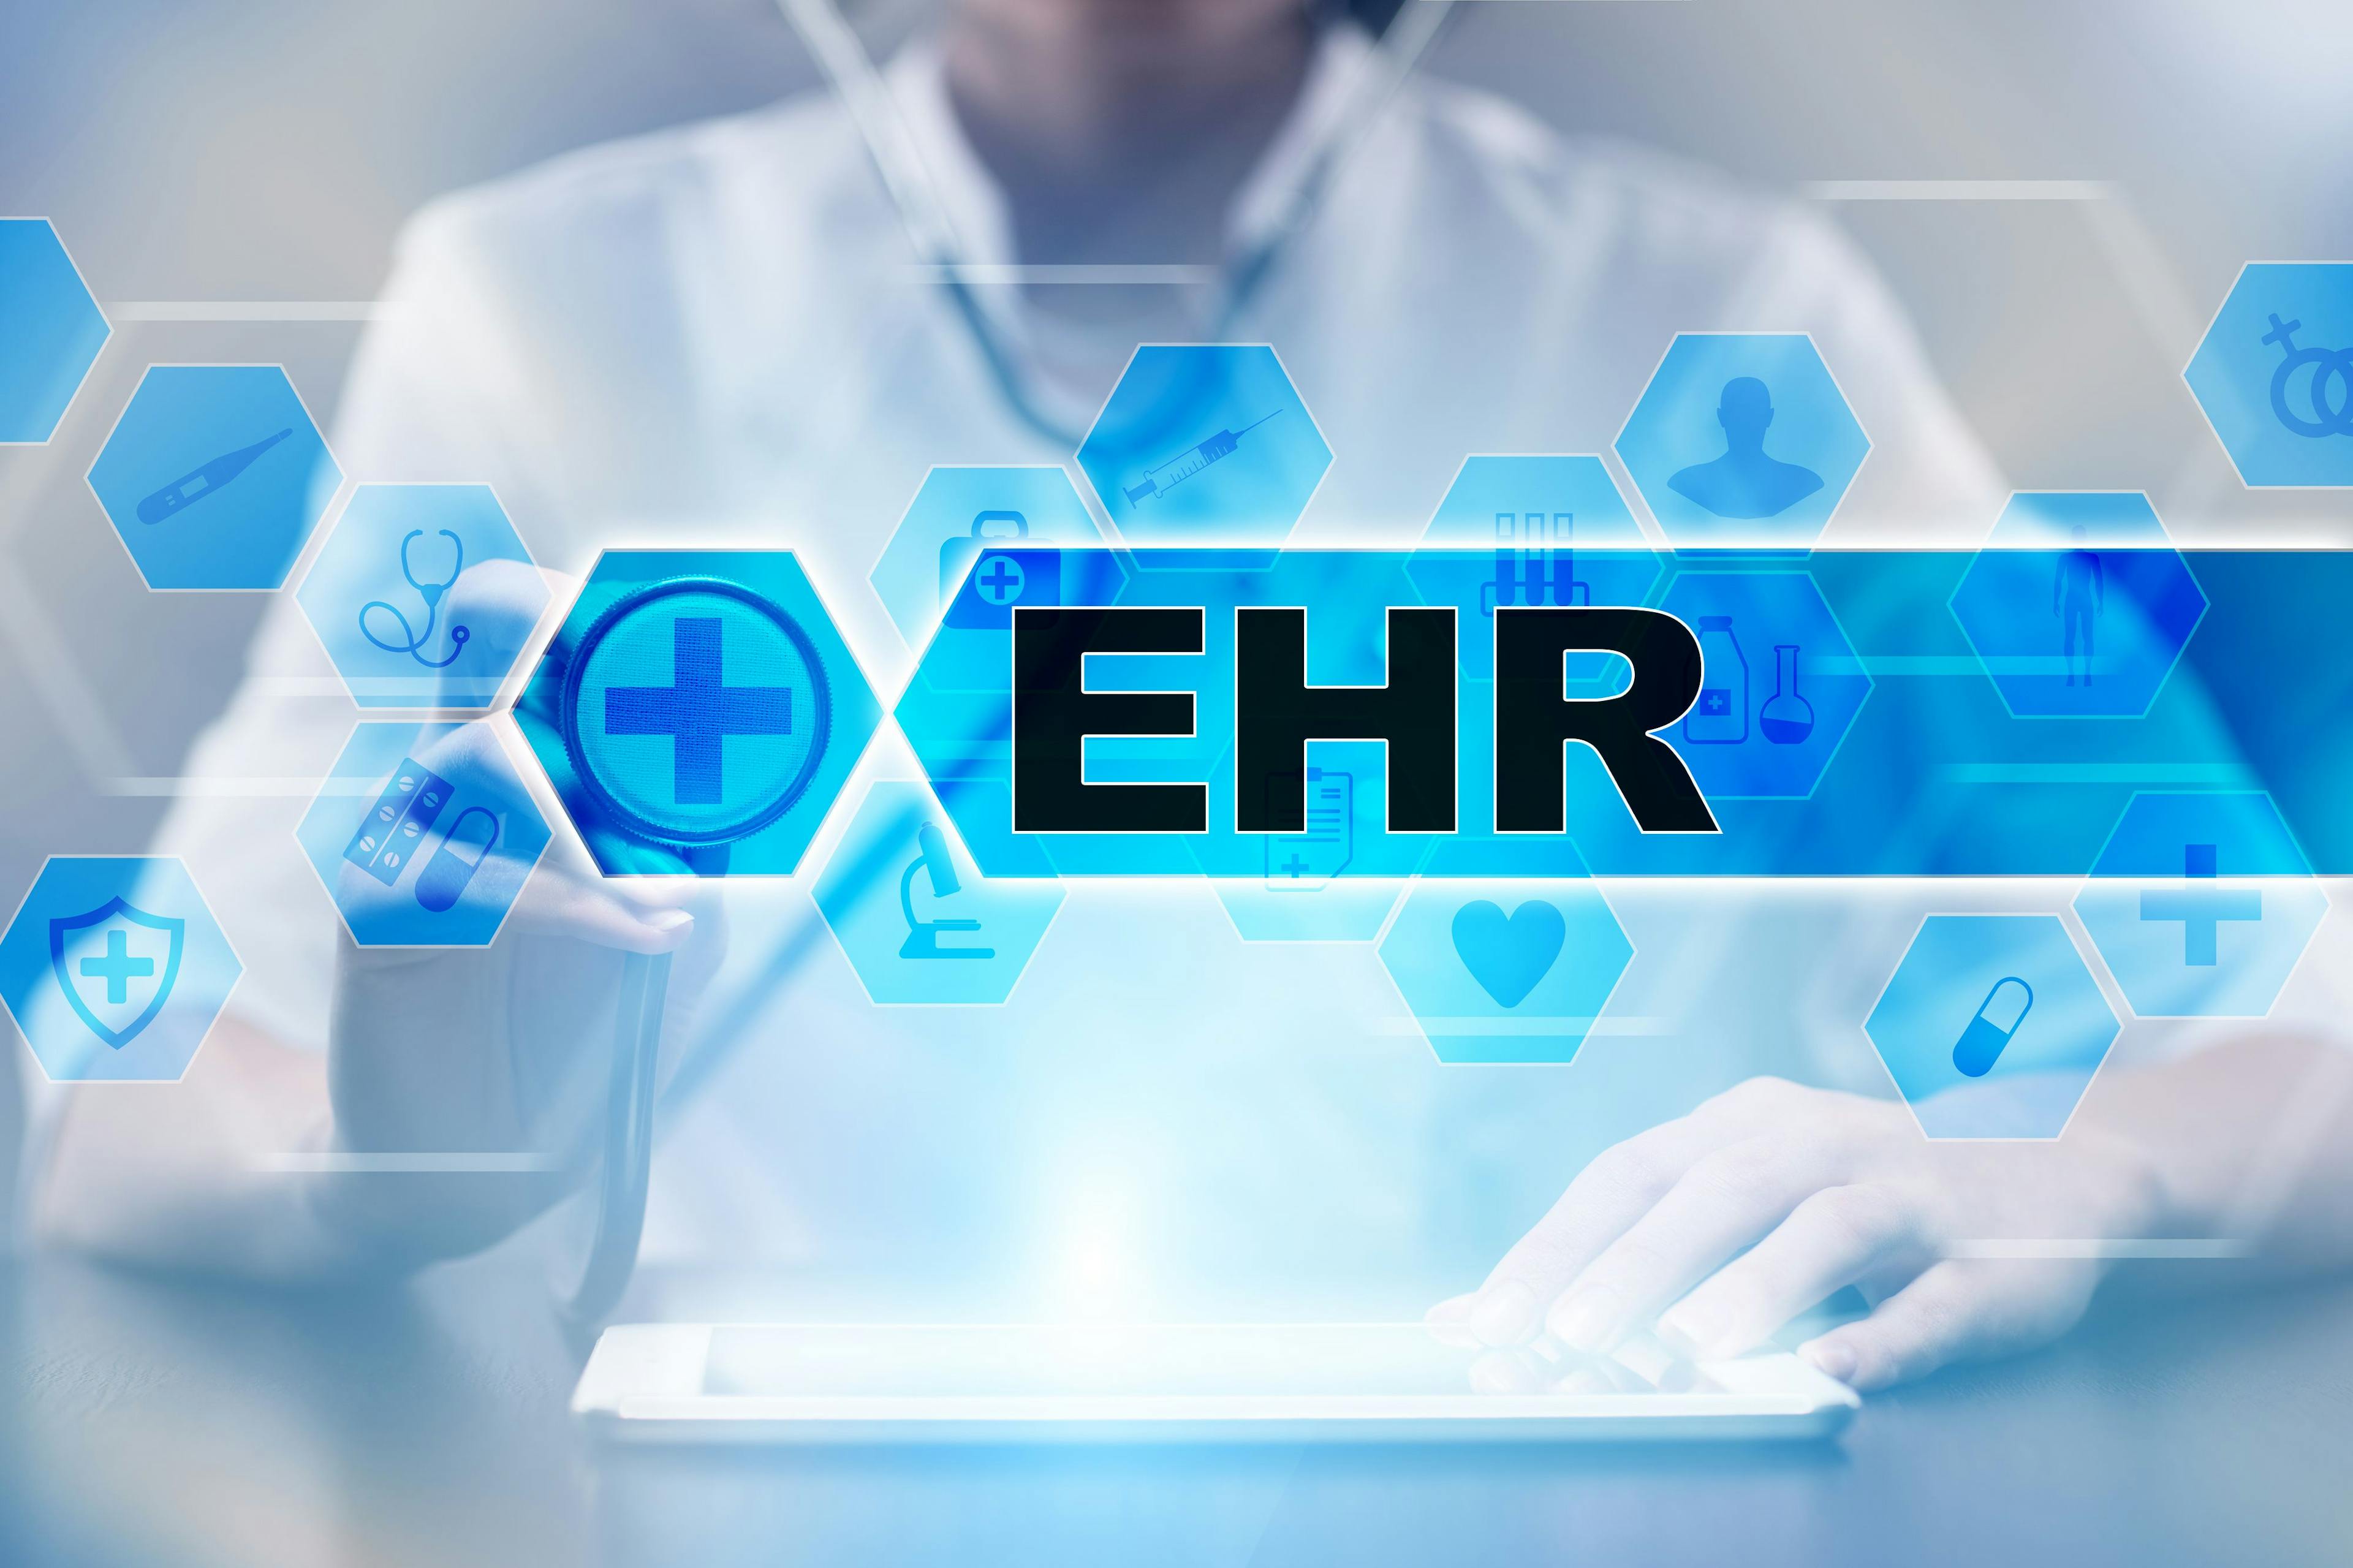 Female physicians spend more time in EHR than male physicians, study says